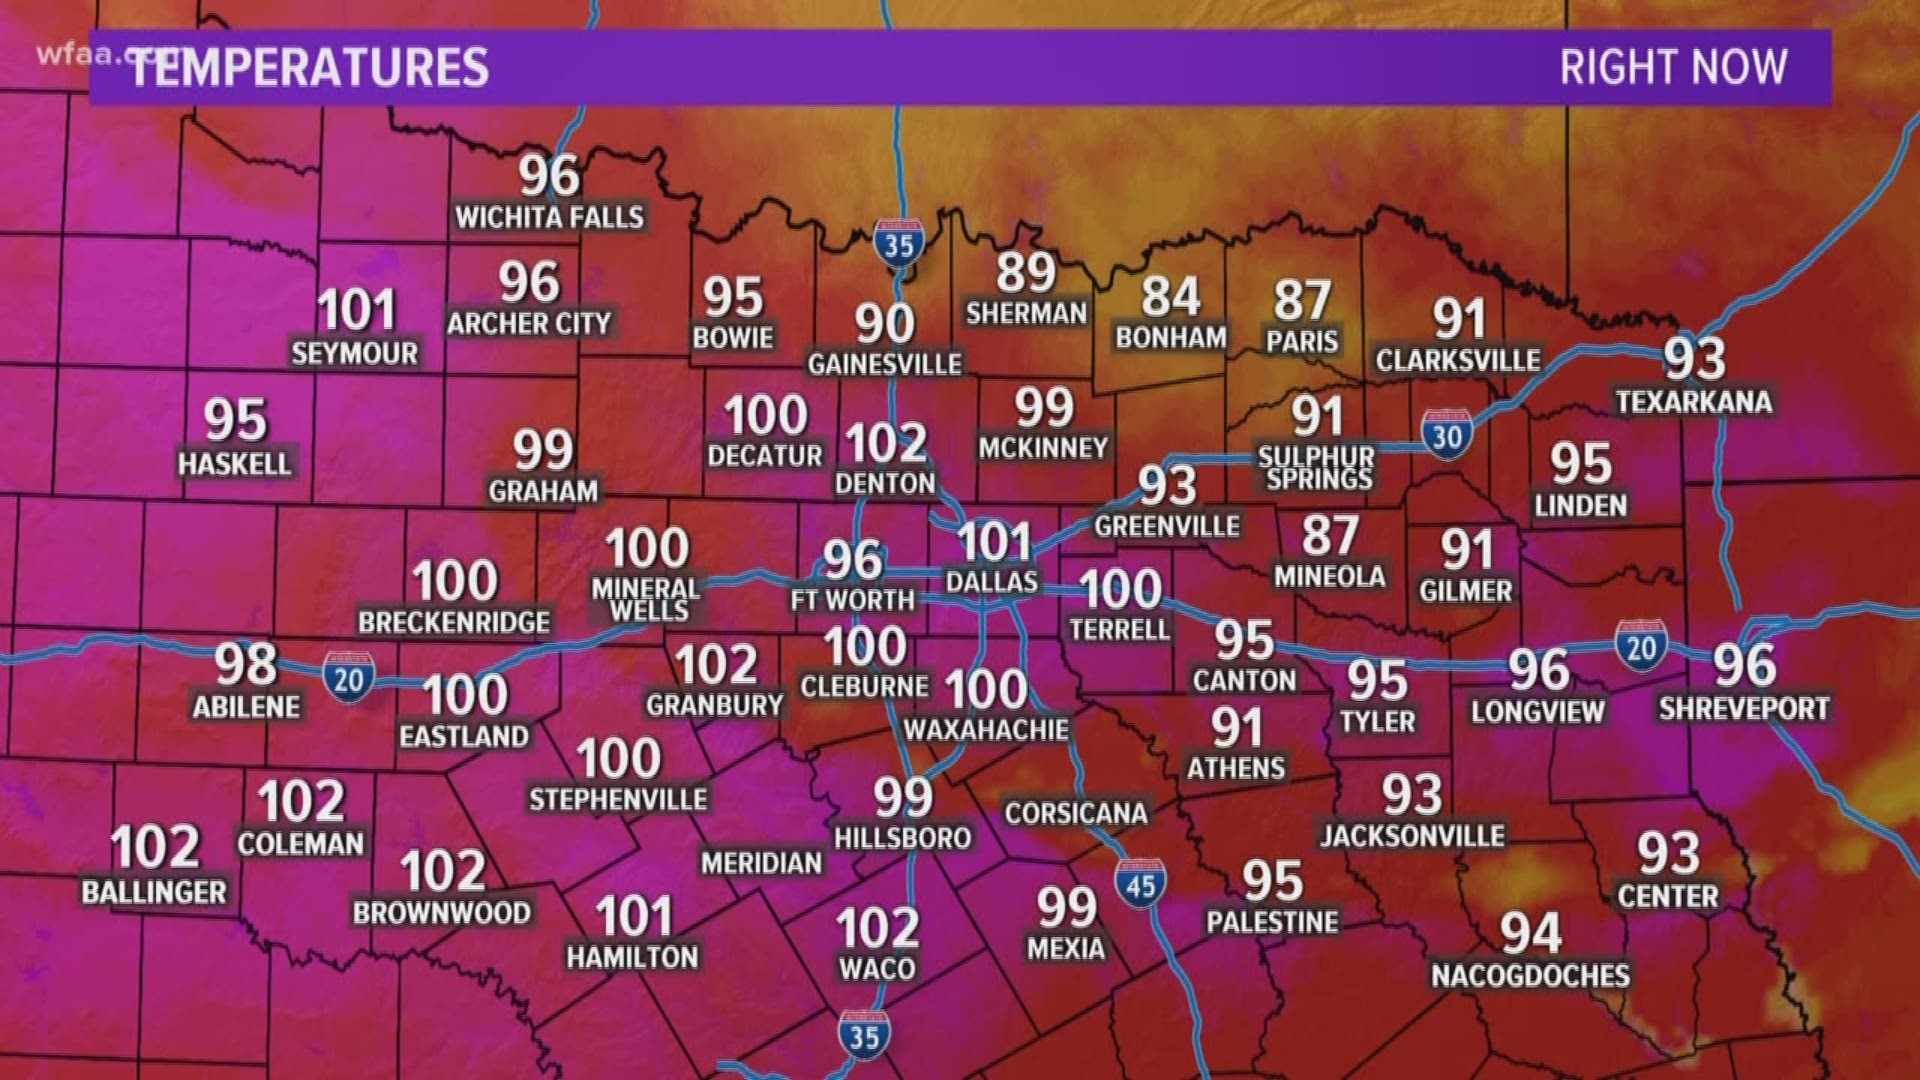 DFW hits 100 degrees for first time in 2018 yes, really